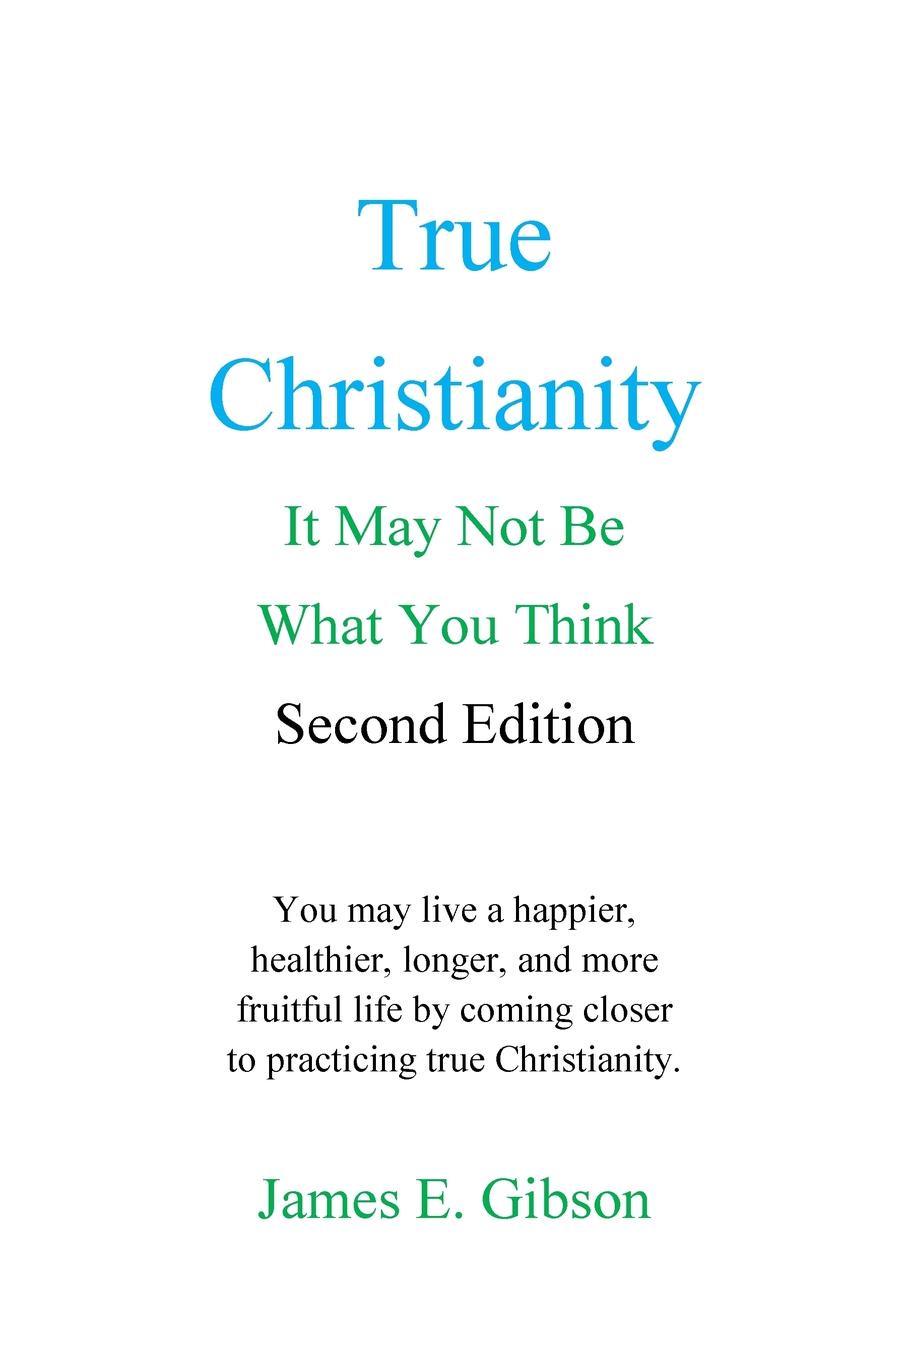 True Christianity. It May Not Be What You Think